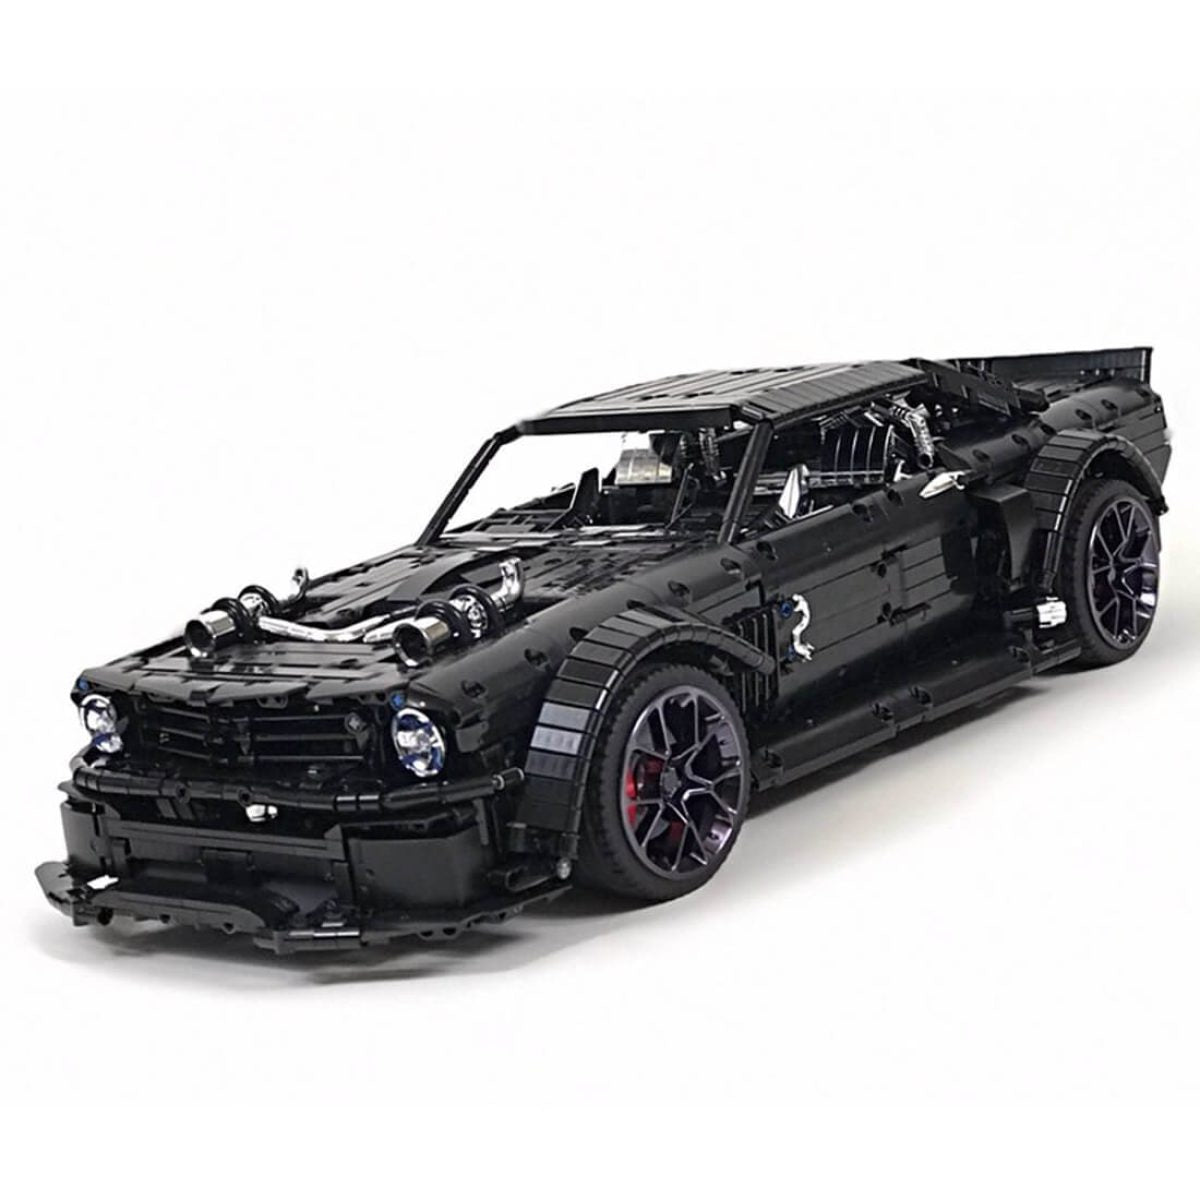 Ken Block's Ford Mustang 1,400BHP Gymkhana | s set, compatible with Lego